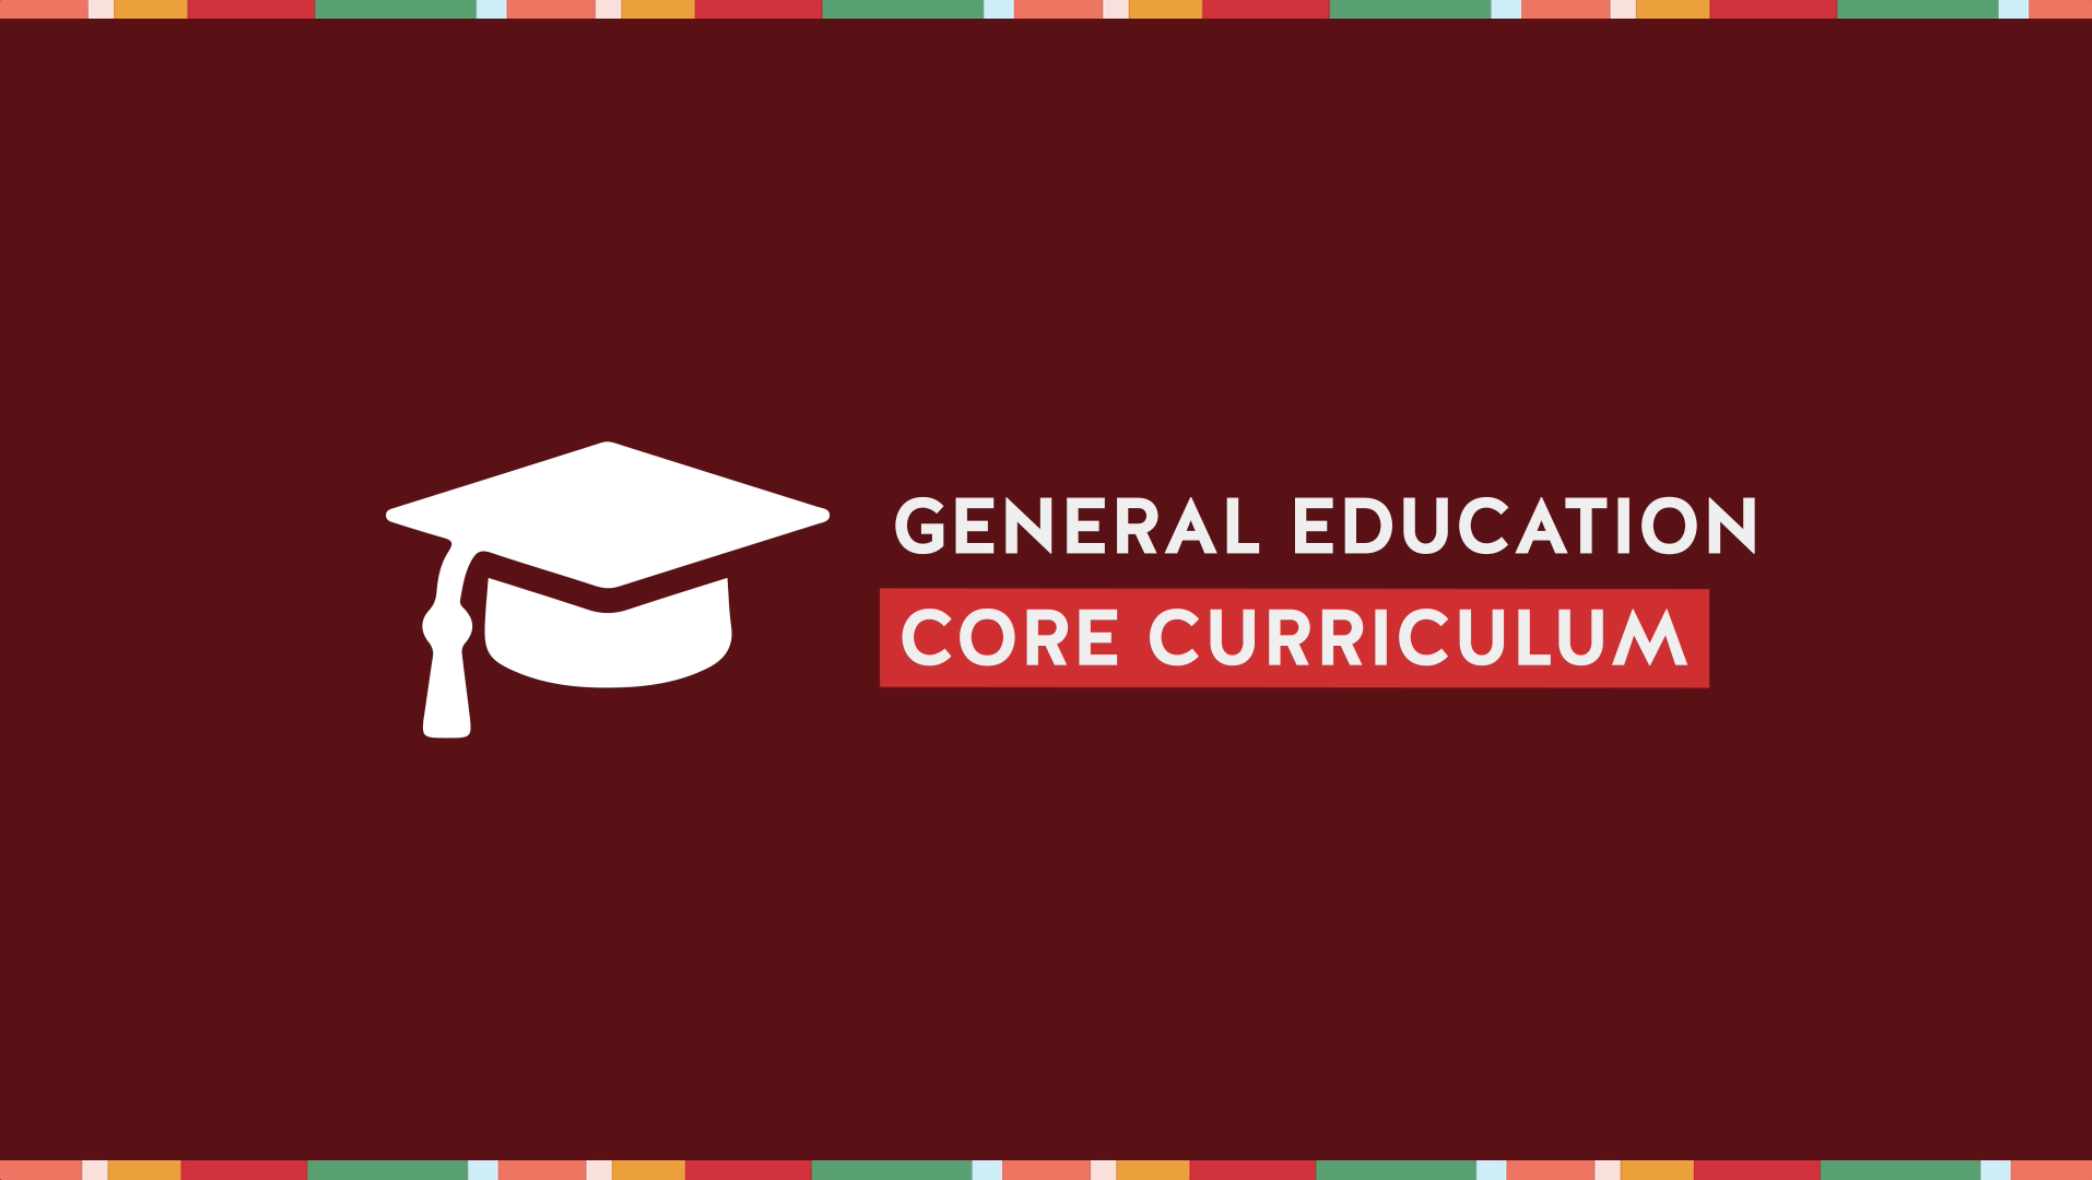 An explanation of General Education Core Curriculum at Texas State